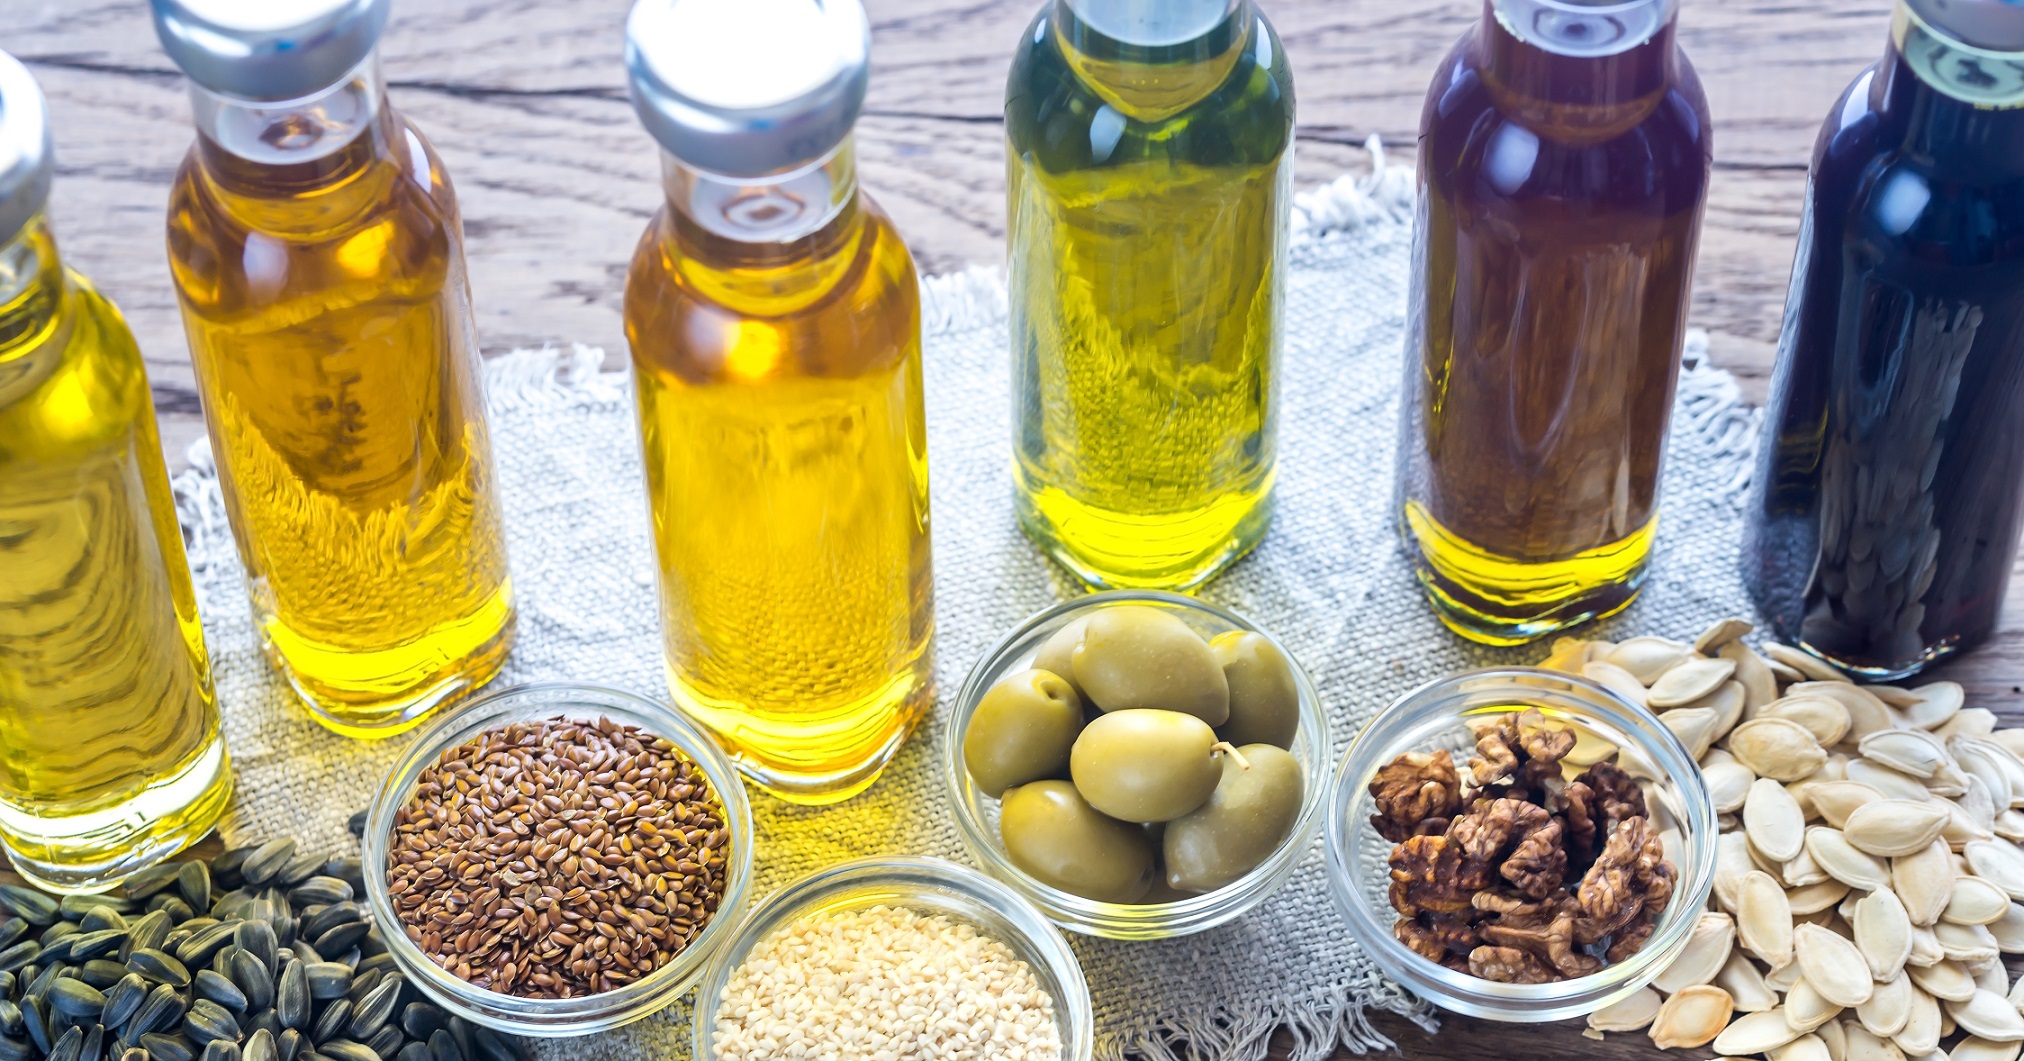 Nutrition: Cooking oils can form genetically damaging substances